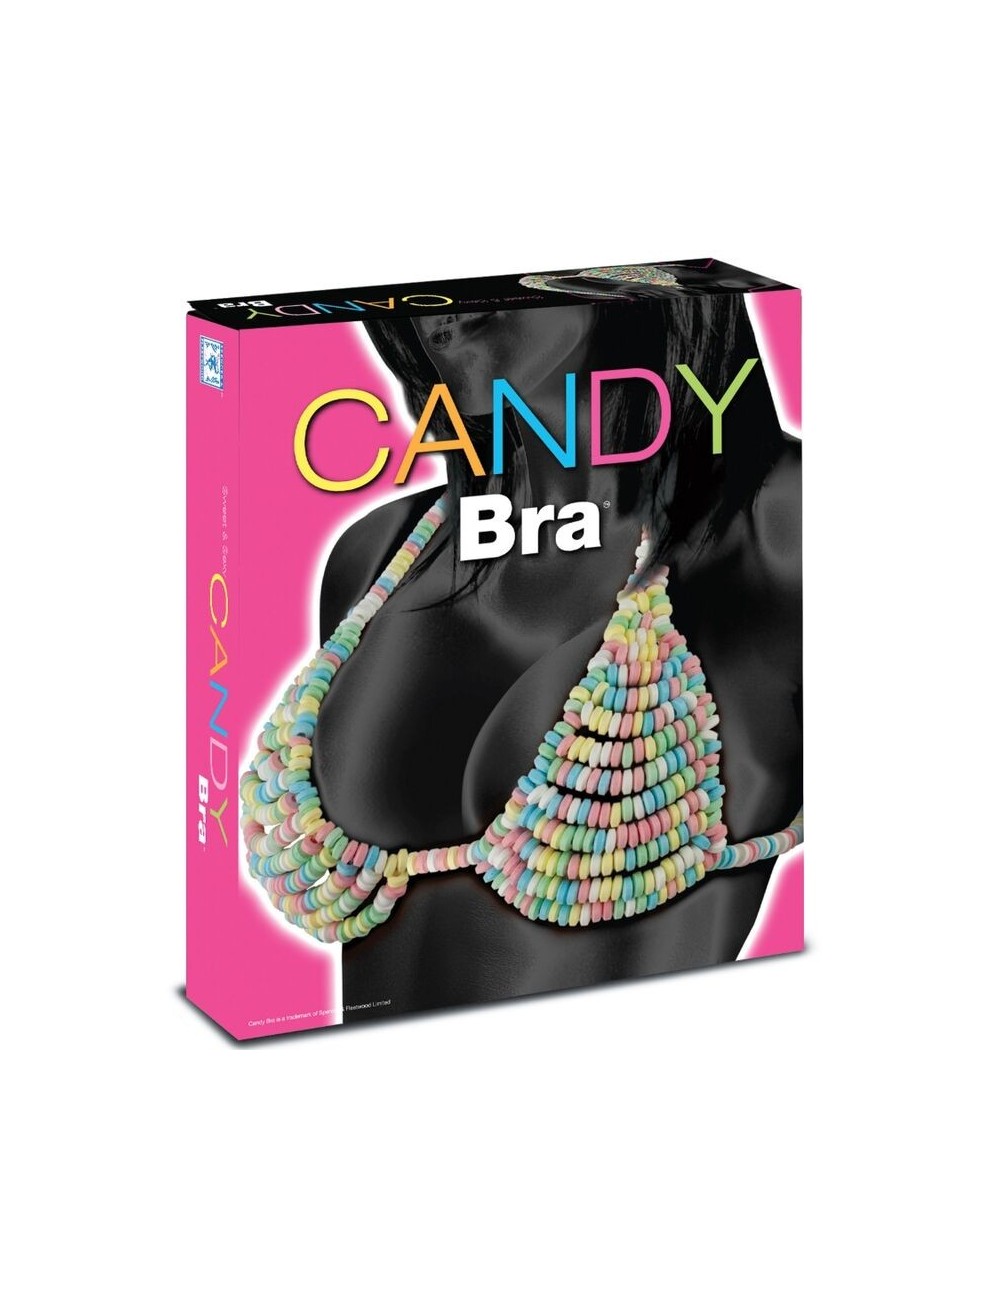 Sextoys - Humour - Comestibles - SOUTIEN-GORGE CANDY - Spencer&fletwood Limited